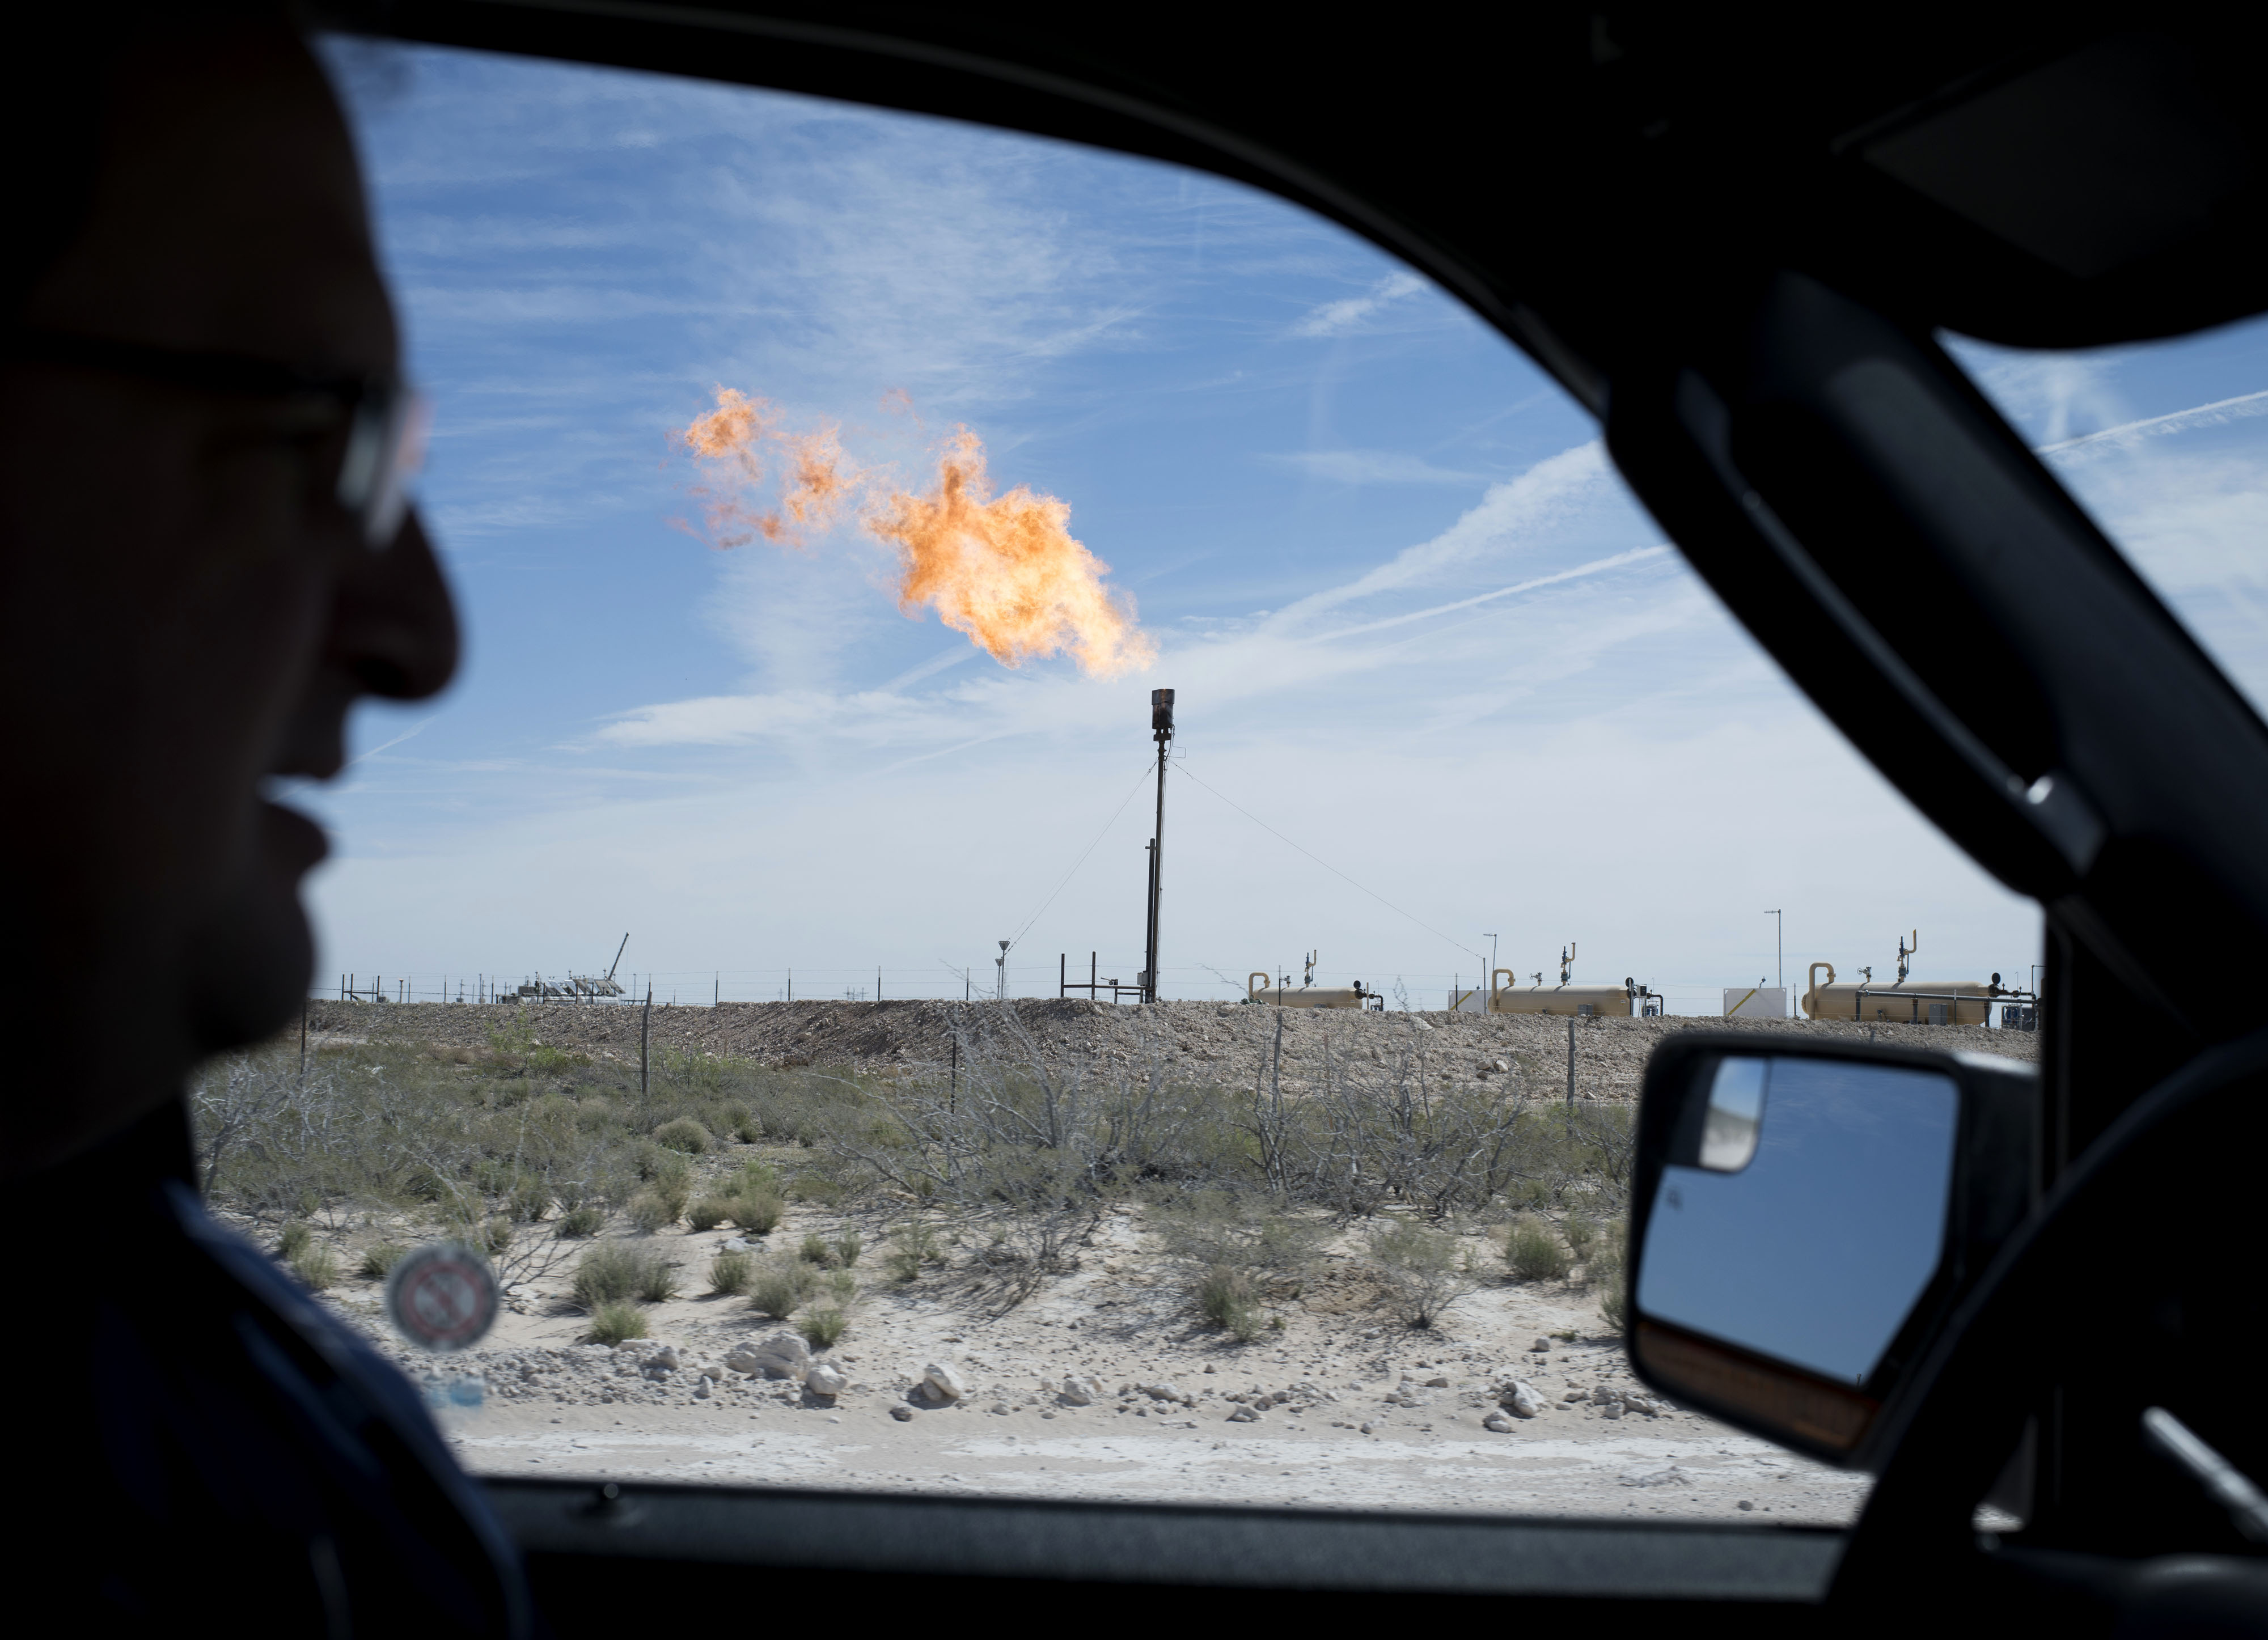 Big Oil's Plan To Buy Into The Shale Boom